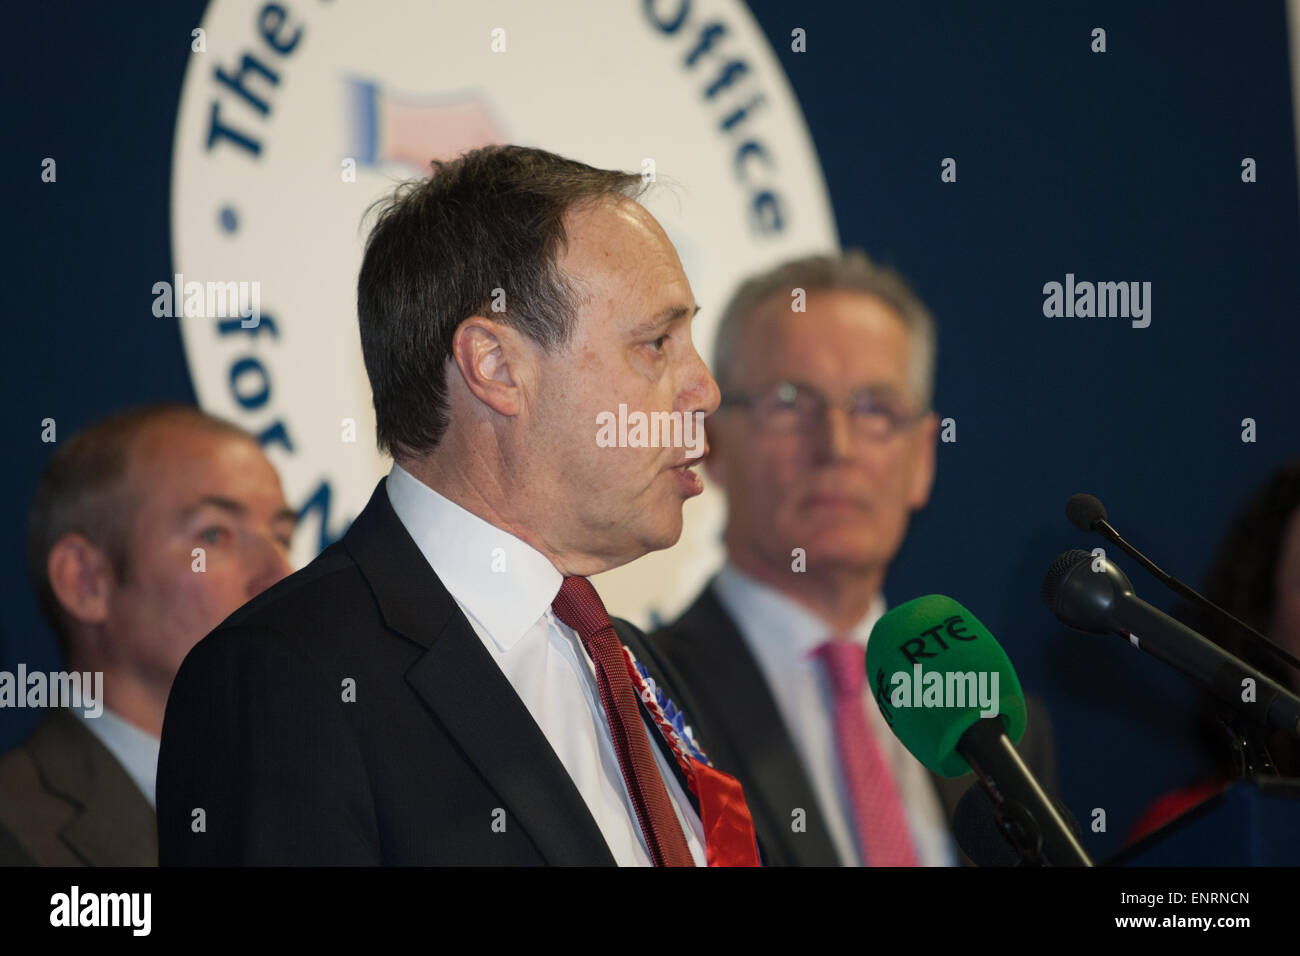 Belfast UK. 7th May 2015 General Election:  DUP Nigel Dodds (Gerry Kelly Sinn Fein in background) gives his acceptance speach af Stock Photo